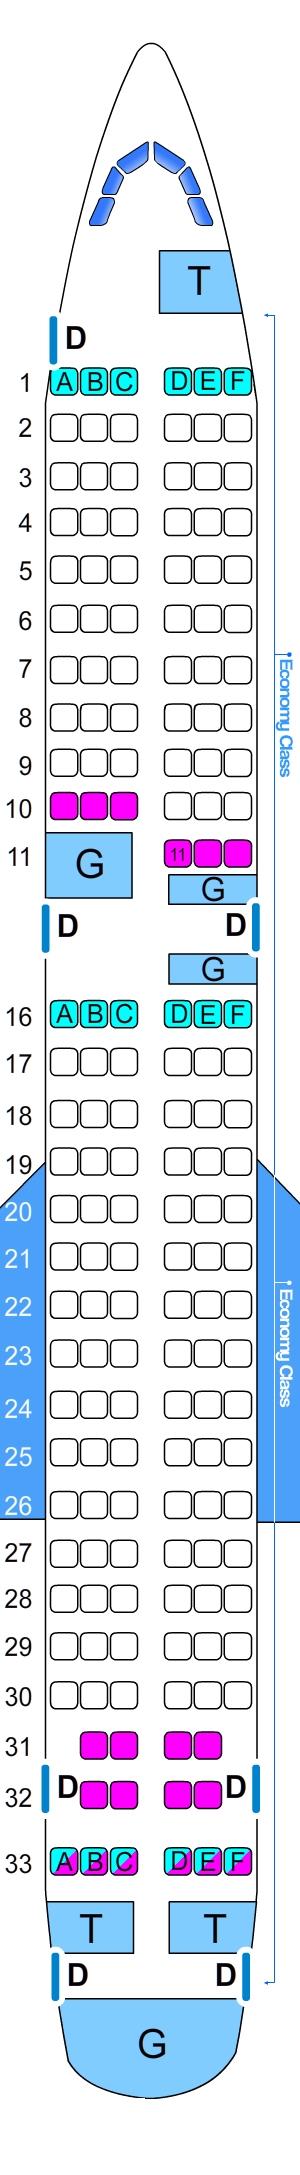 Seat map for Tupolev TU 154M 167pax